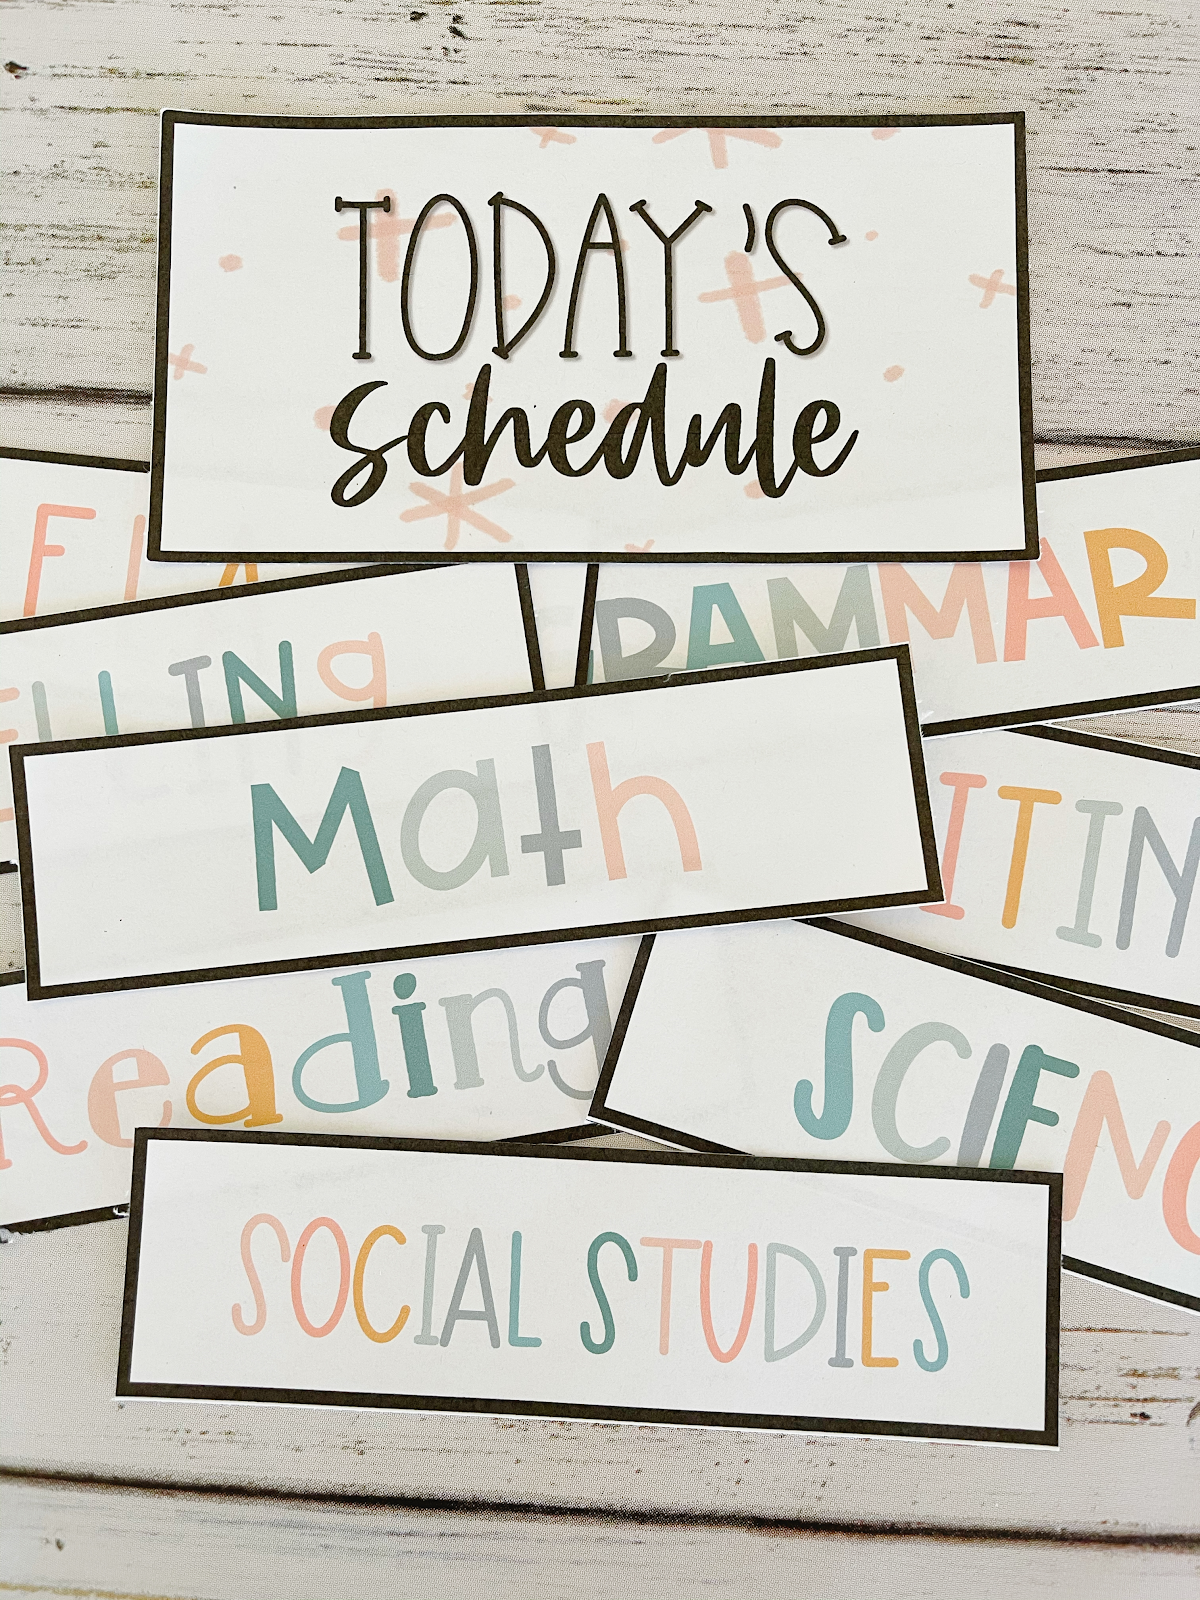 This image shows a pile of schedule cards with different subjects listed. Some of the cards read "Math", "Reading", "science", and "Social Studies". 